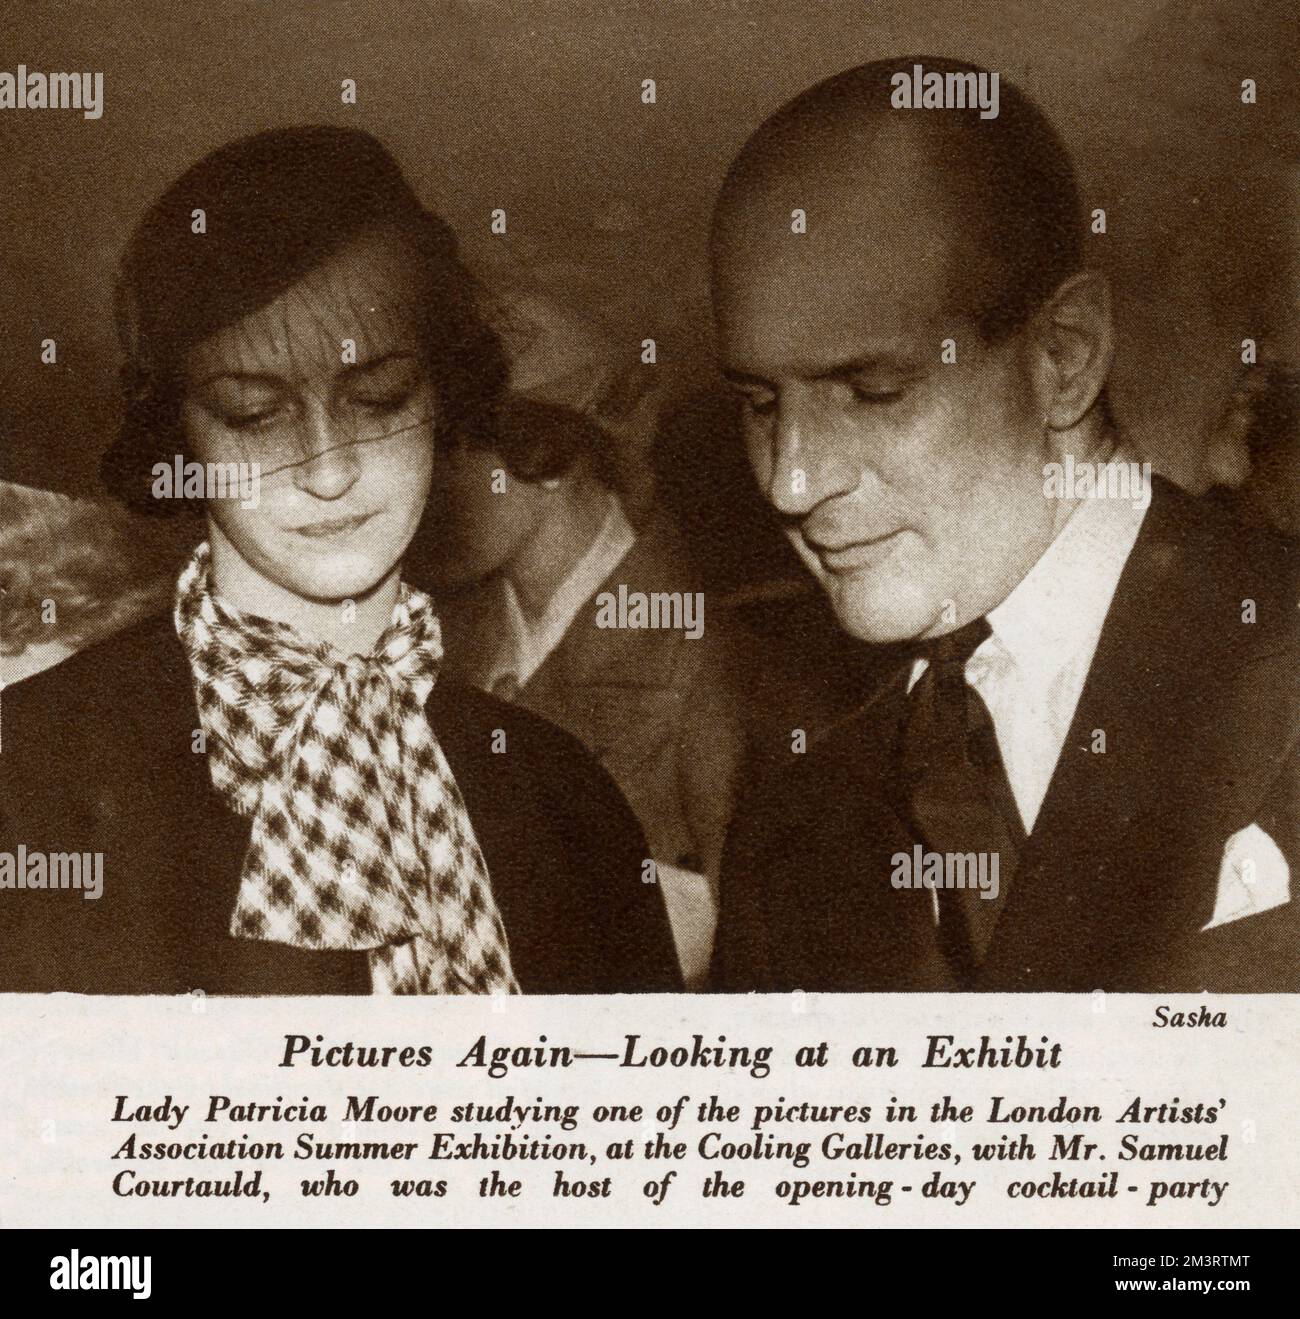 Lady Patricia Moore and Samuel Courtauld studying one of the pictures in the London Artists' Association Summer Exhibition at the Cooling Galleries.  Courtauld was the host of the opening day cocktail party.     Date: 1933 Stock Photo